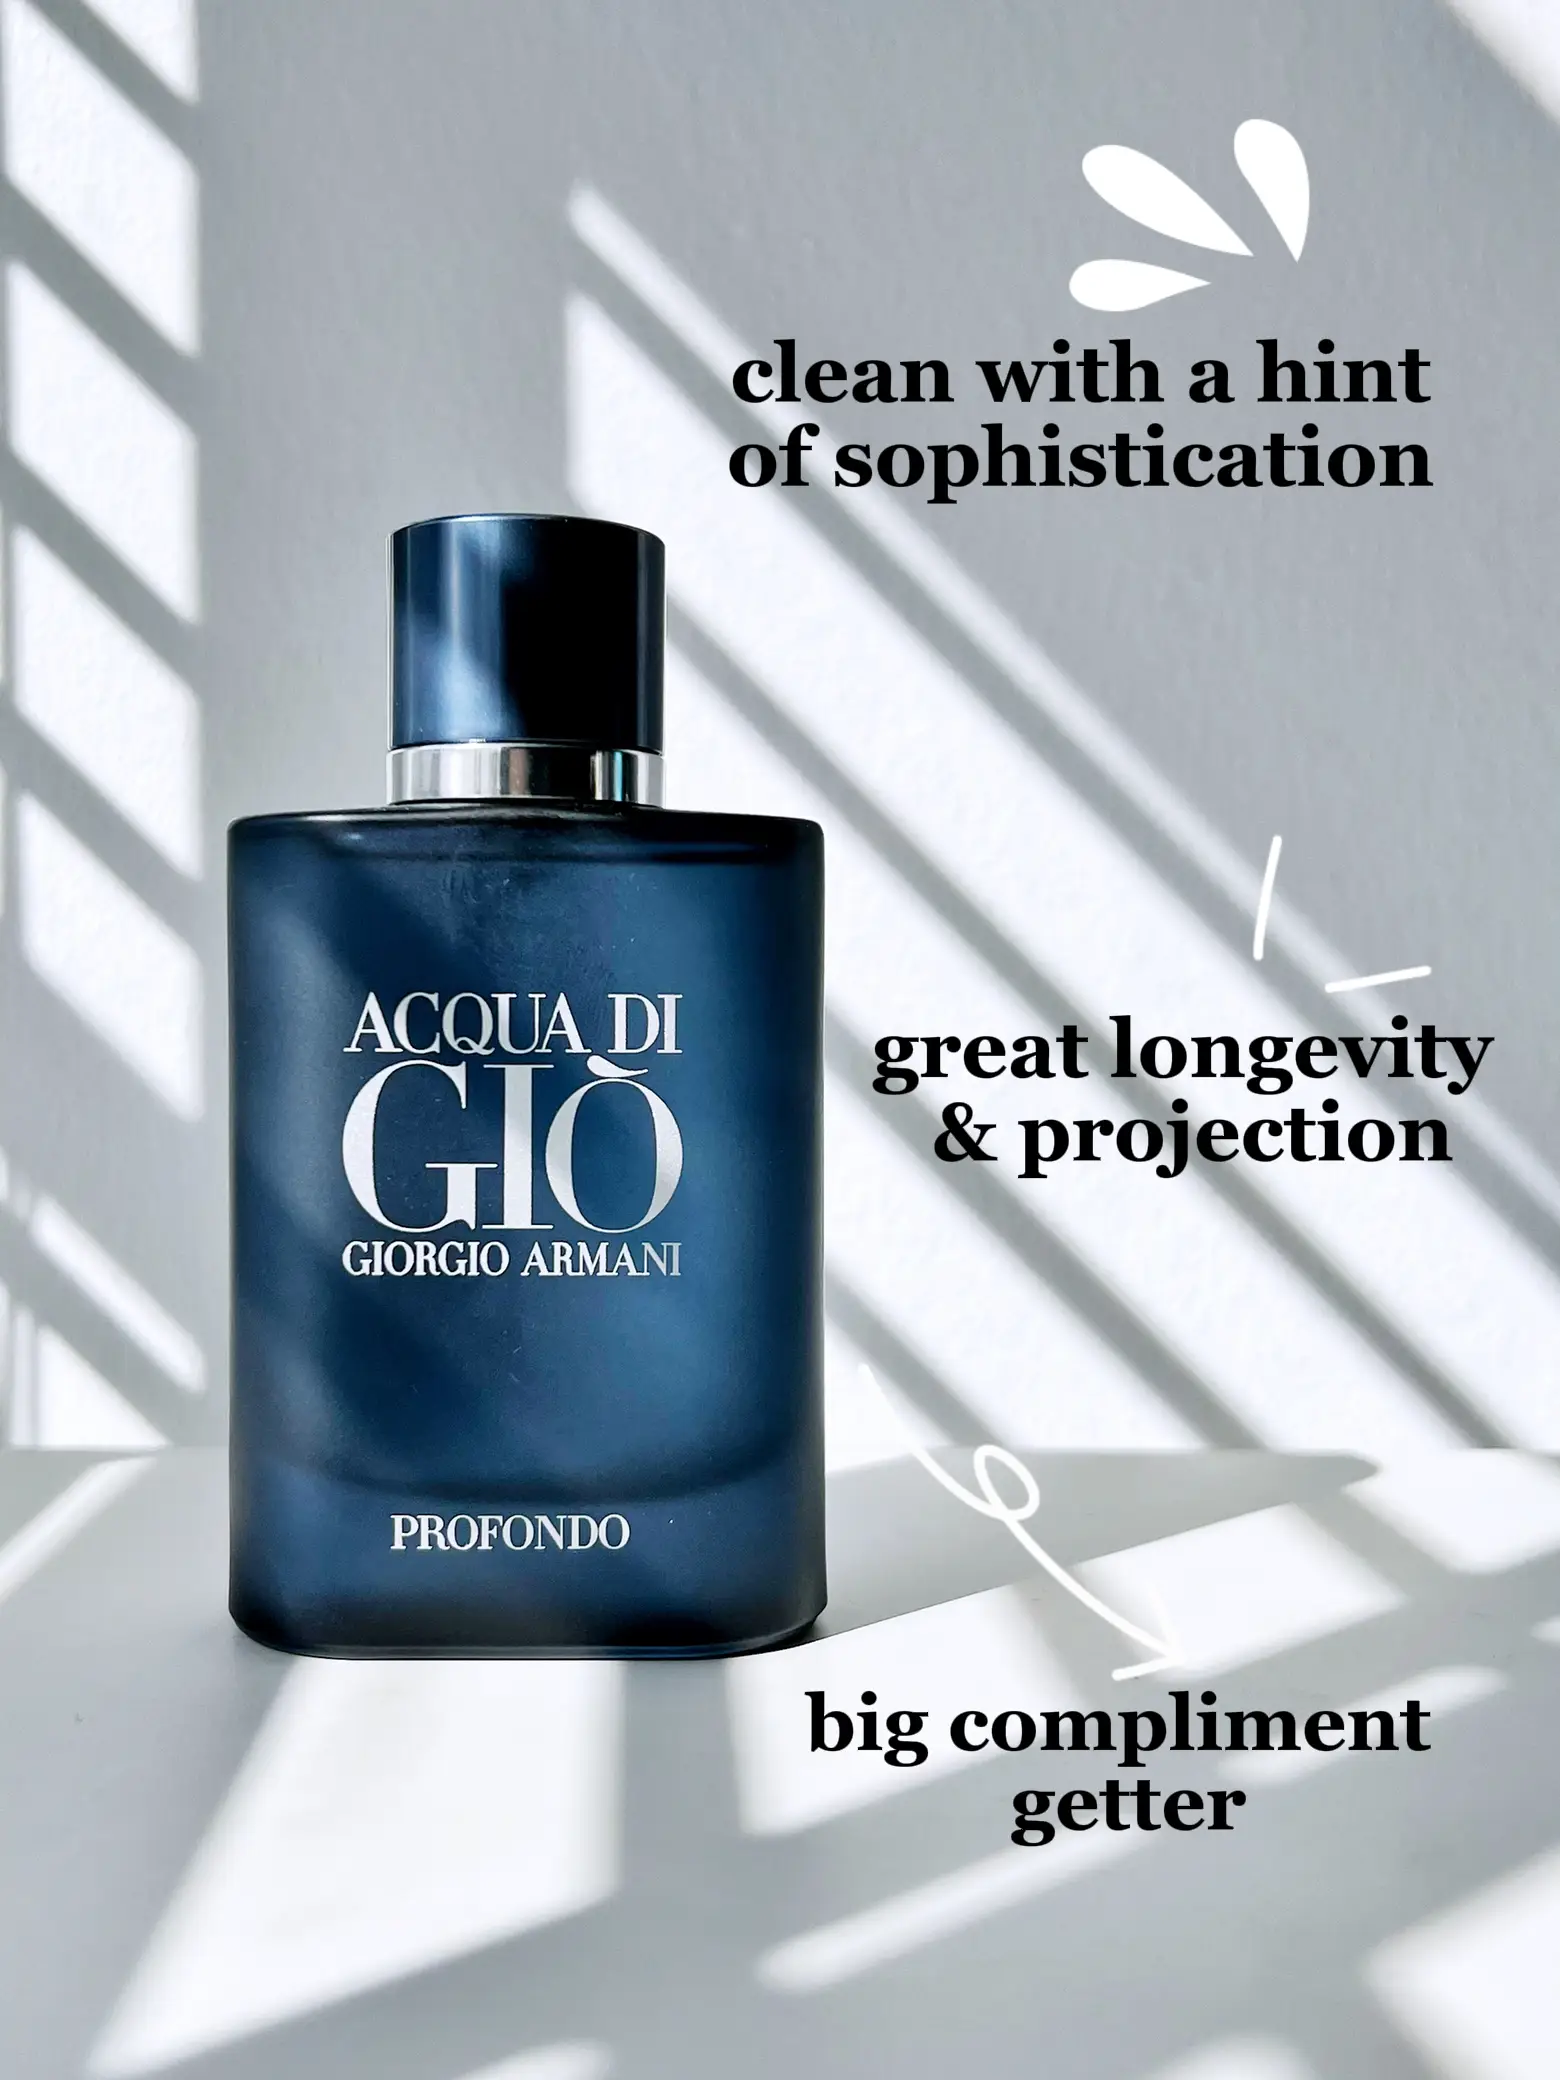 LOOKING FOR GIFT IDEAS? MEN'S COLOGNE REVIEW, Gallery posted by Ken